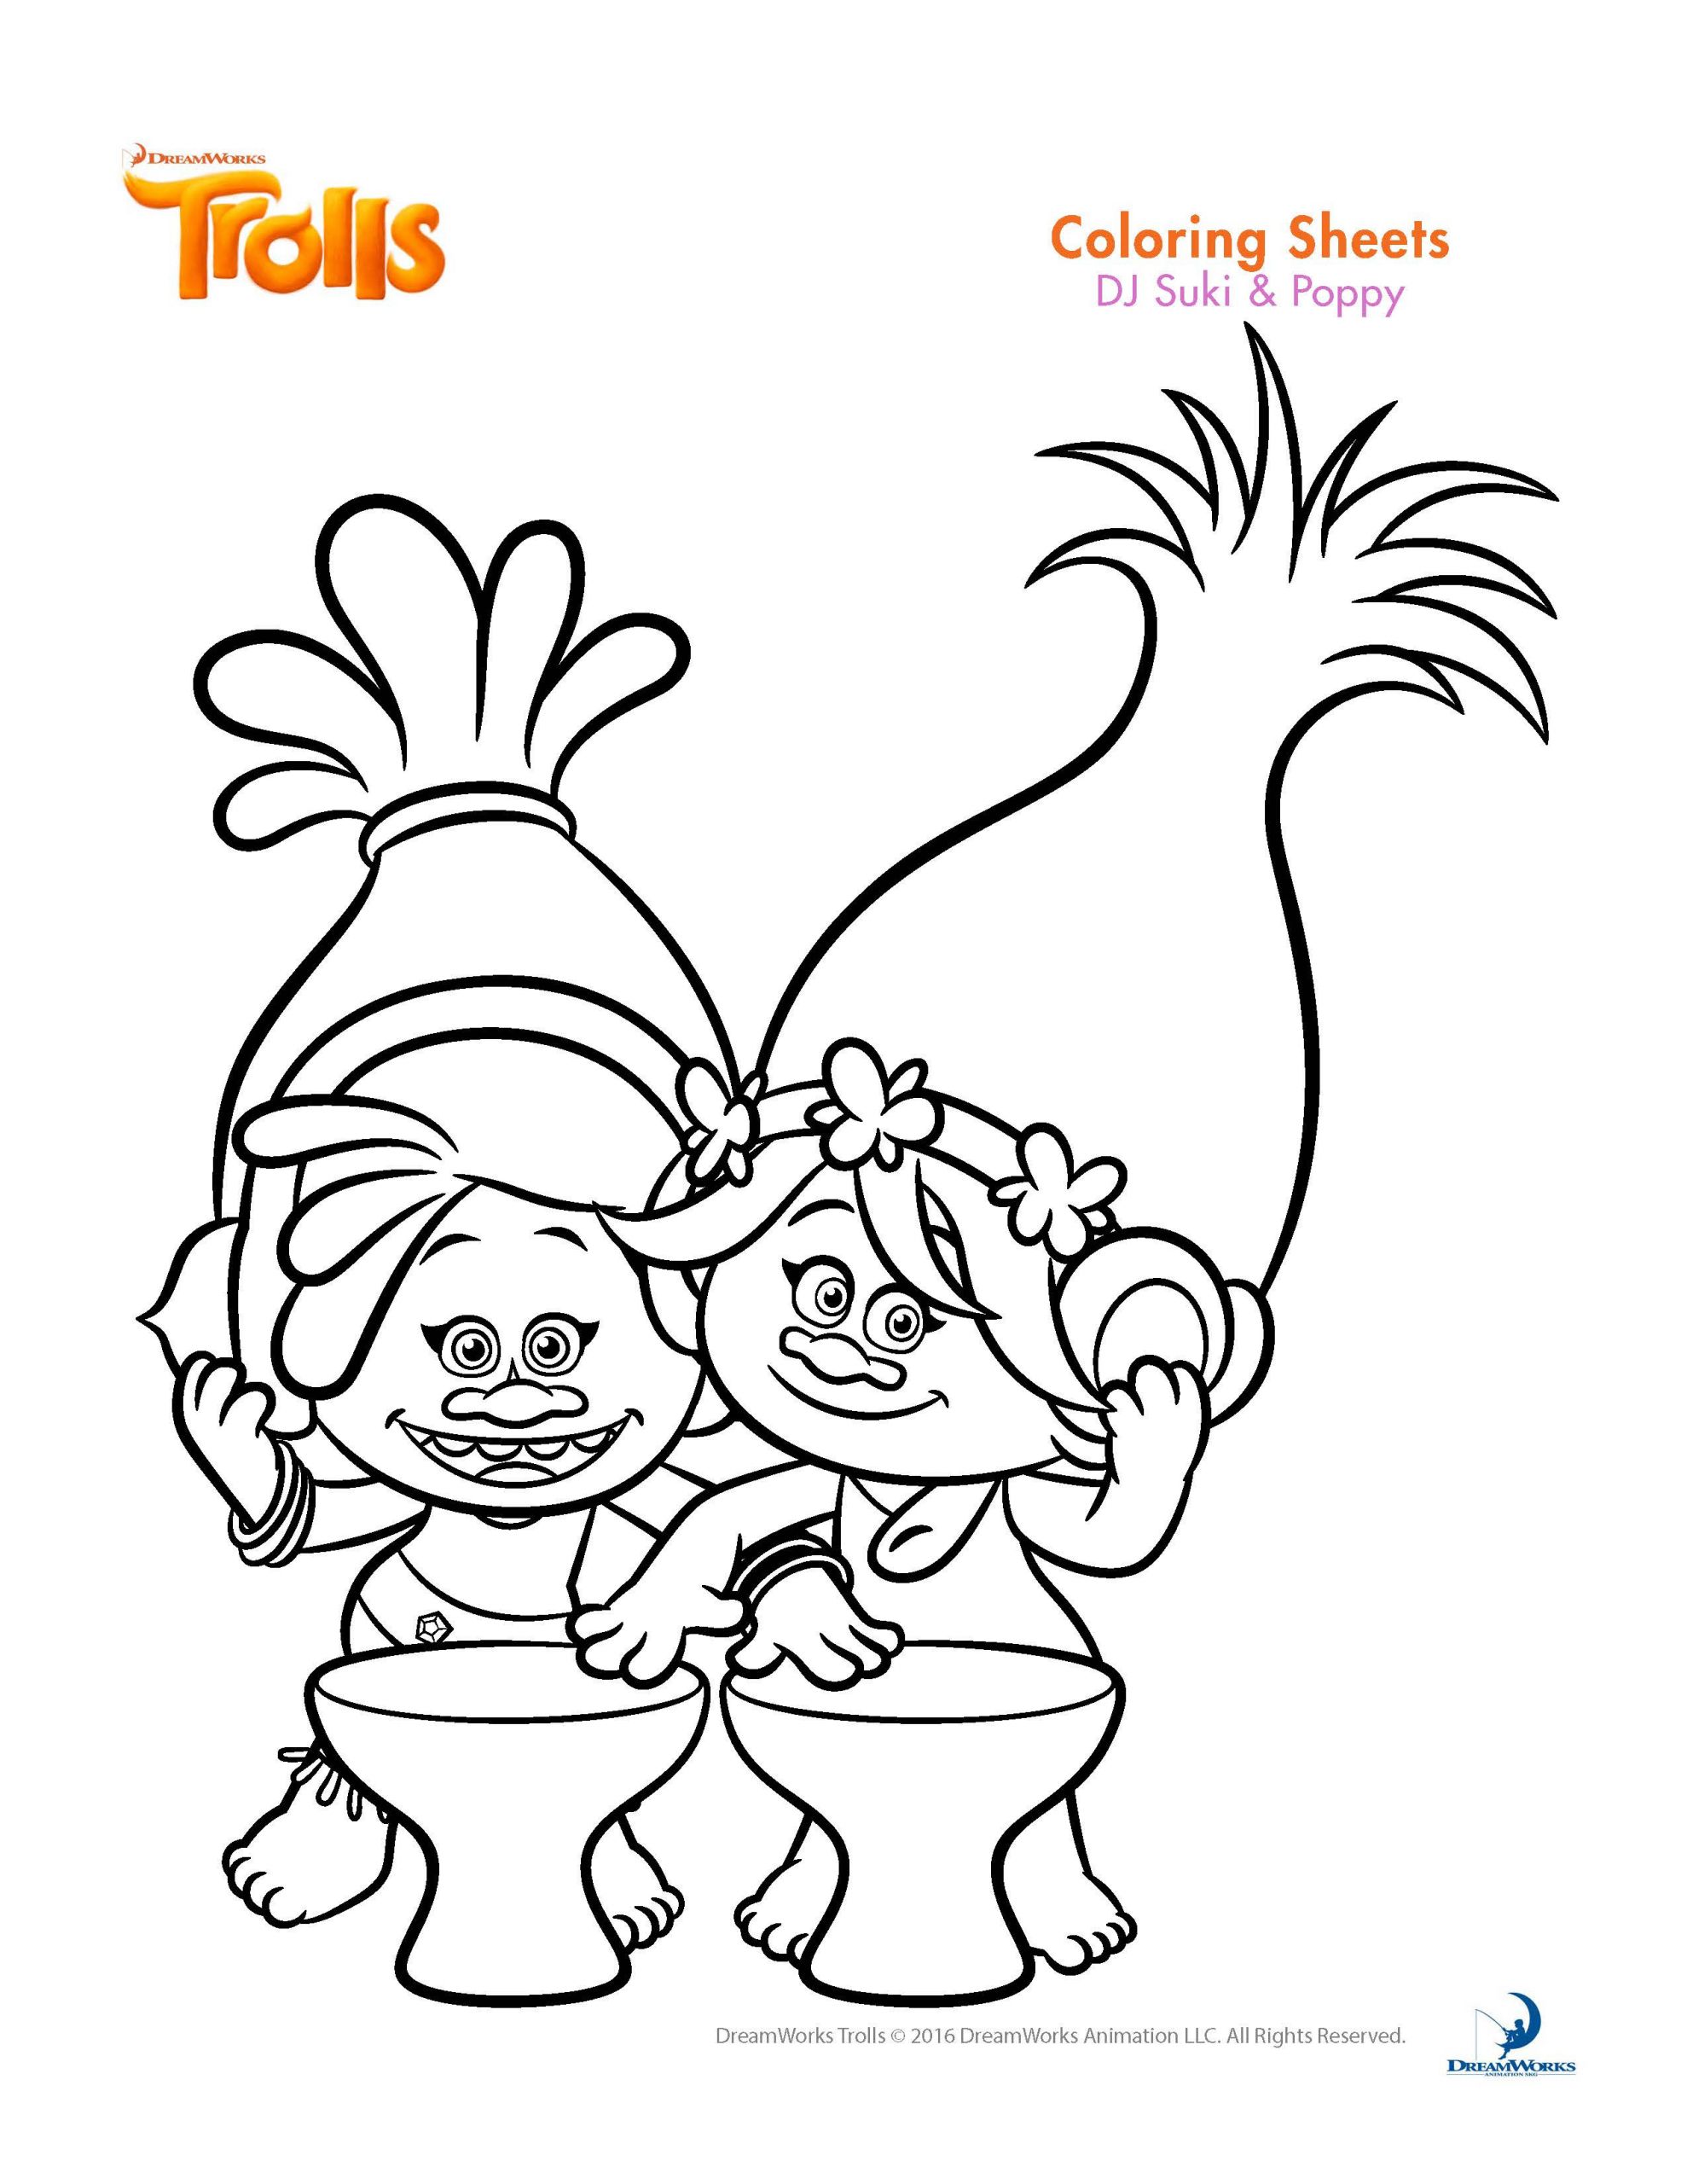 Trolls Printable Coloring Pages
 Trolls coloring sheets and printable activity sheets and a